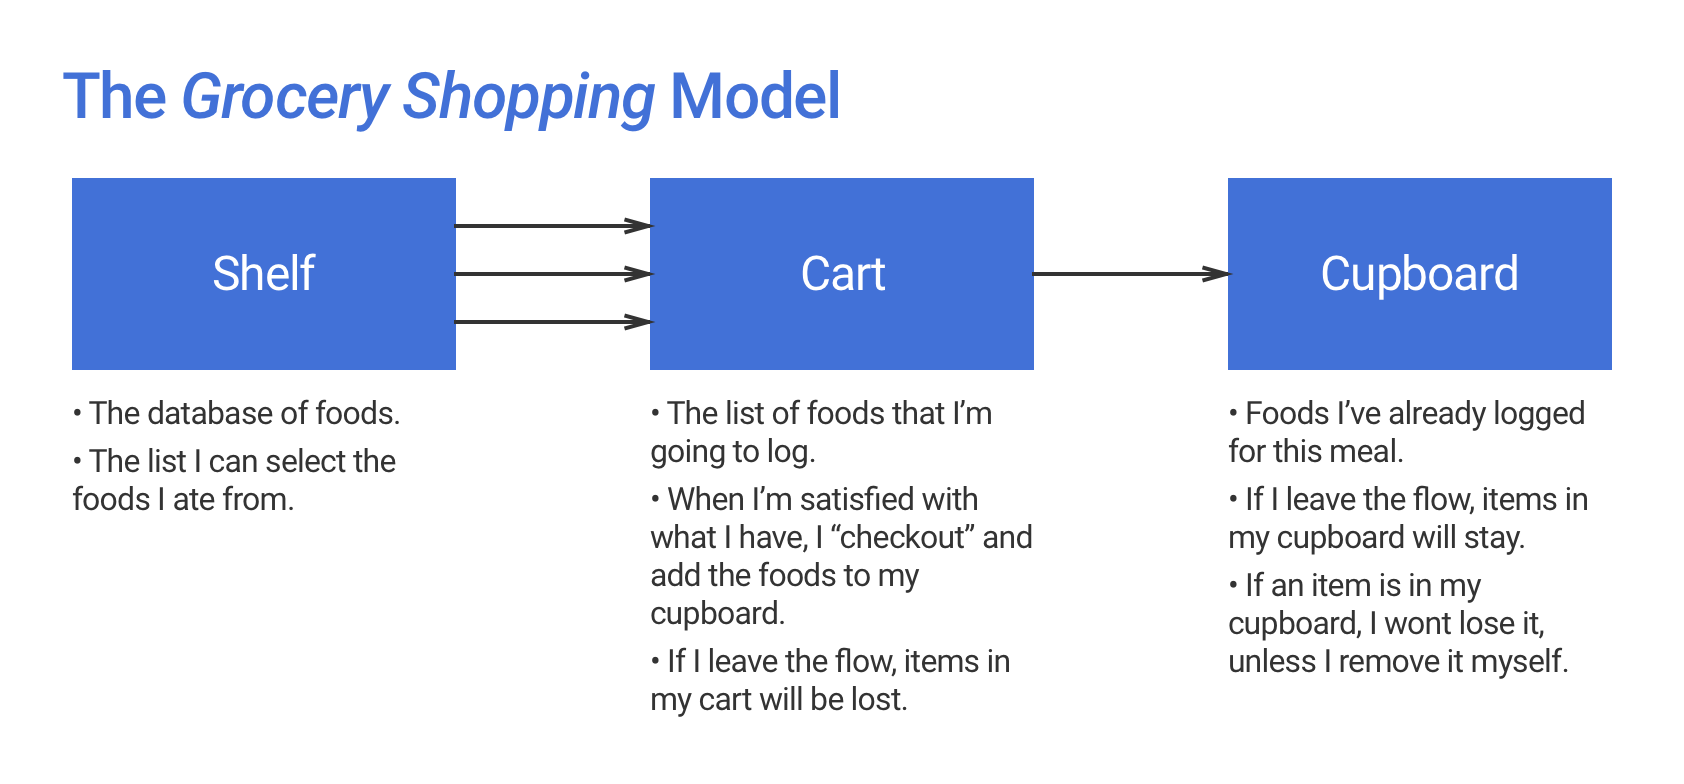 The Grocery shopping metaphor used to communicate the concept model during the design process.